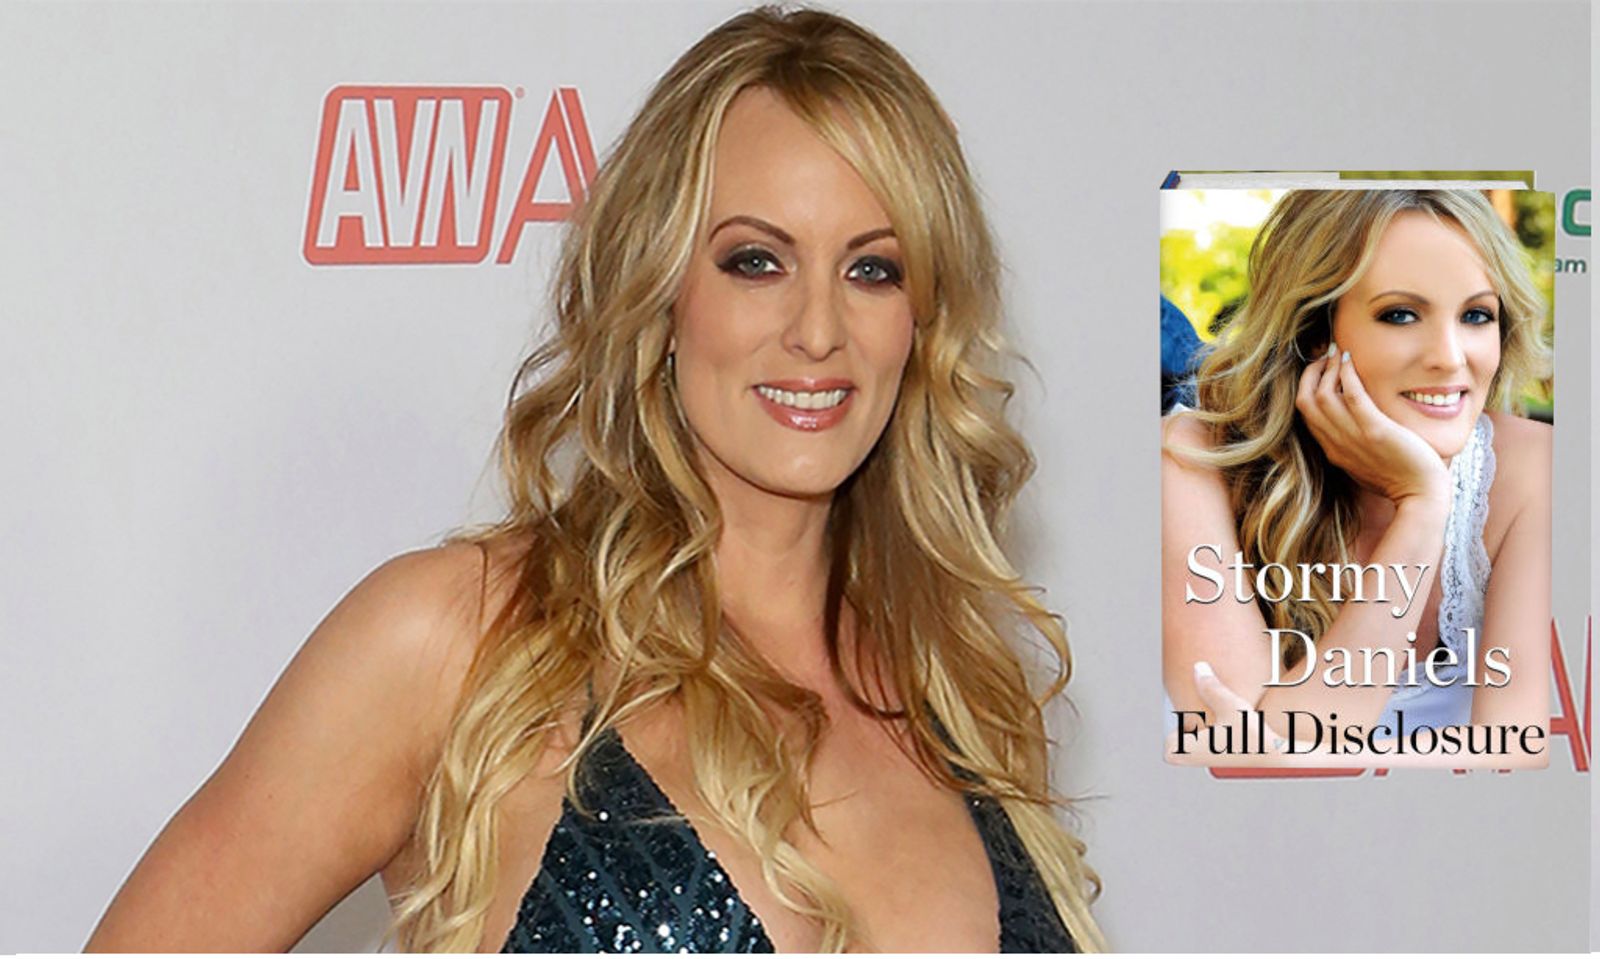 So... What's New With Stormy Daniels? (Besides Dancing & Signing)